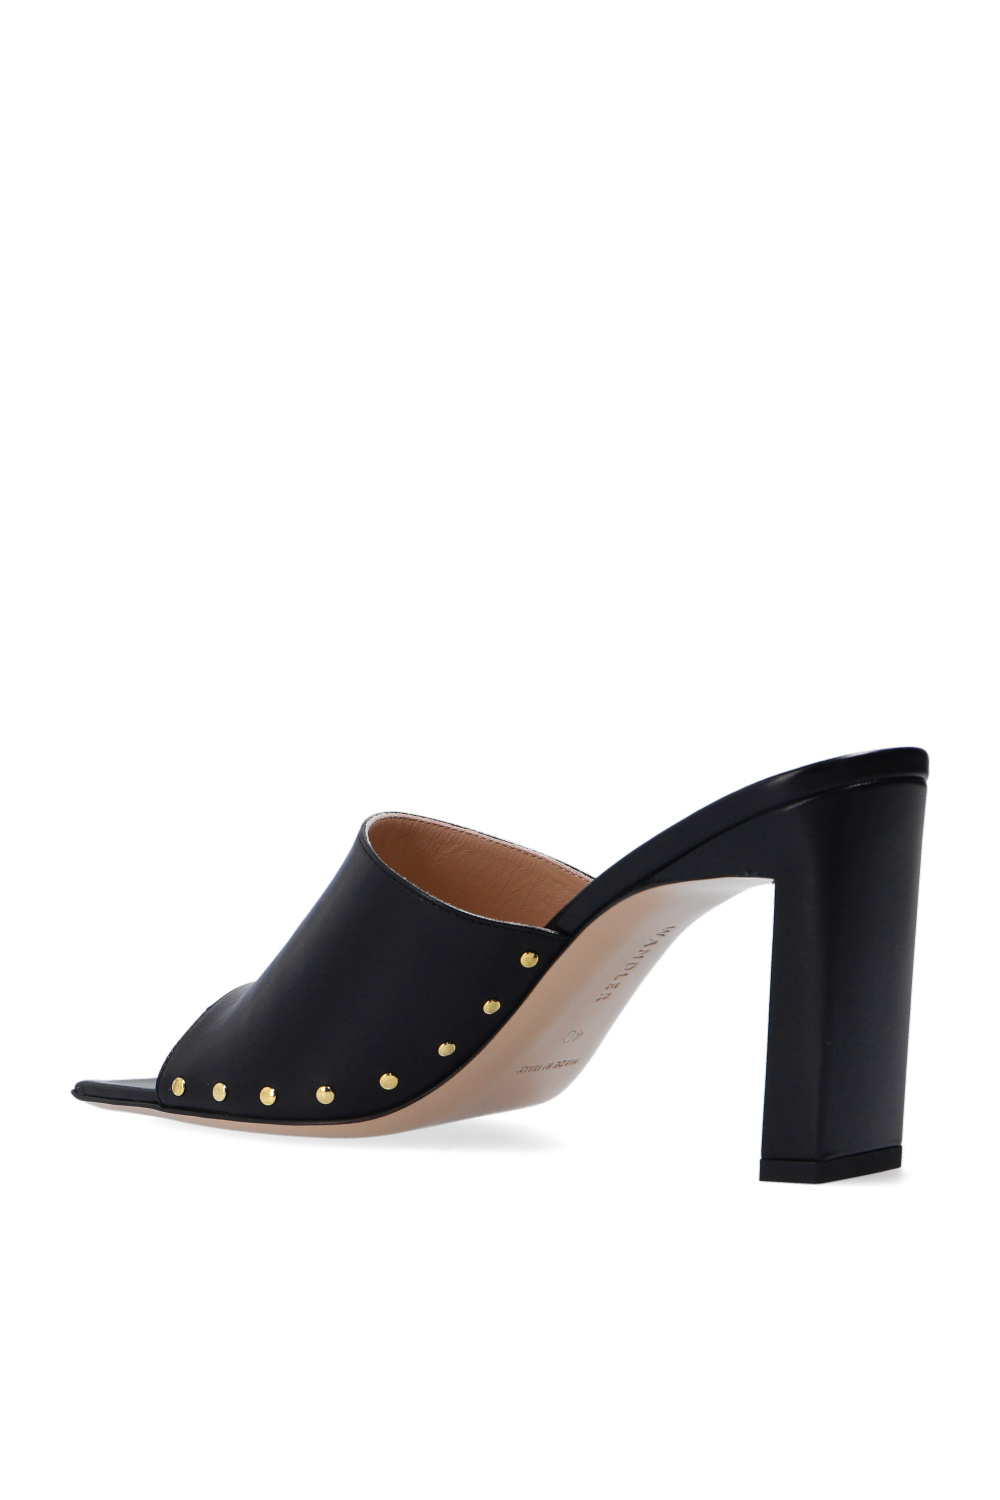 Wandler Leather mules